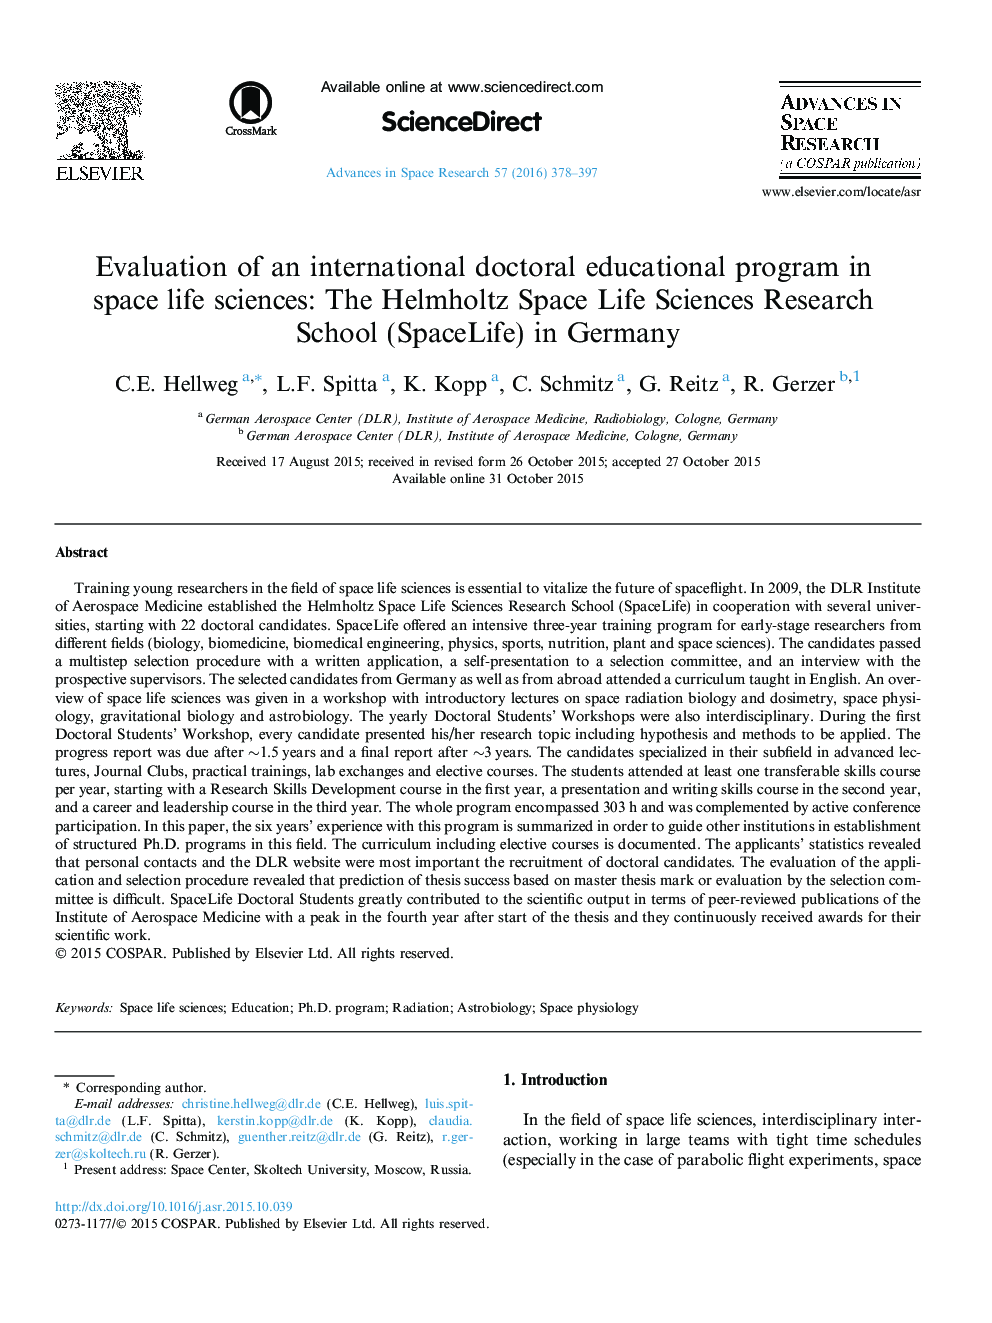 Evaluation of an international doctoral educational program in space life sciences: The Helmholtz Space Life Sciences Research School (SpaceLife) in Germany